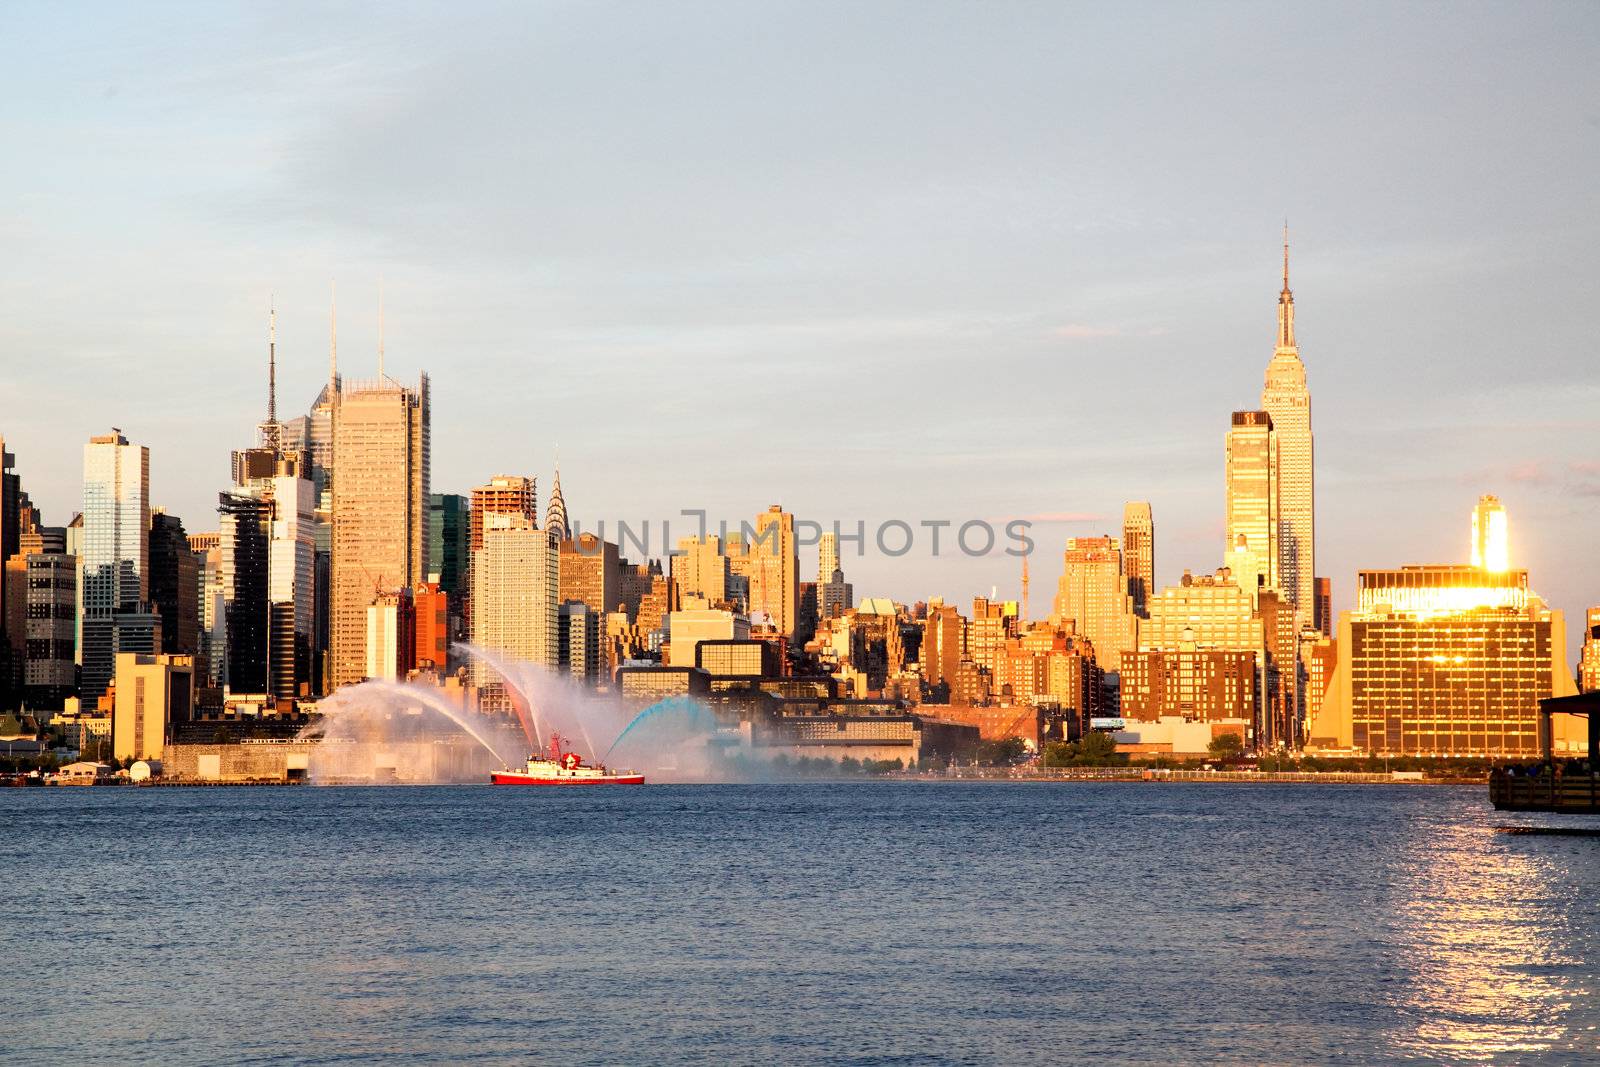 Fireboat water spree prior to Mary's 4th of July fireworks  by gary718